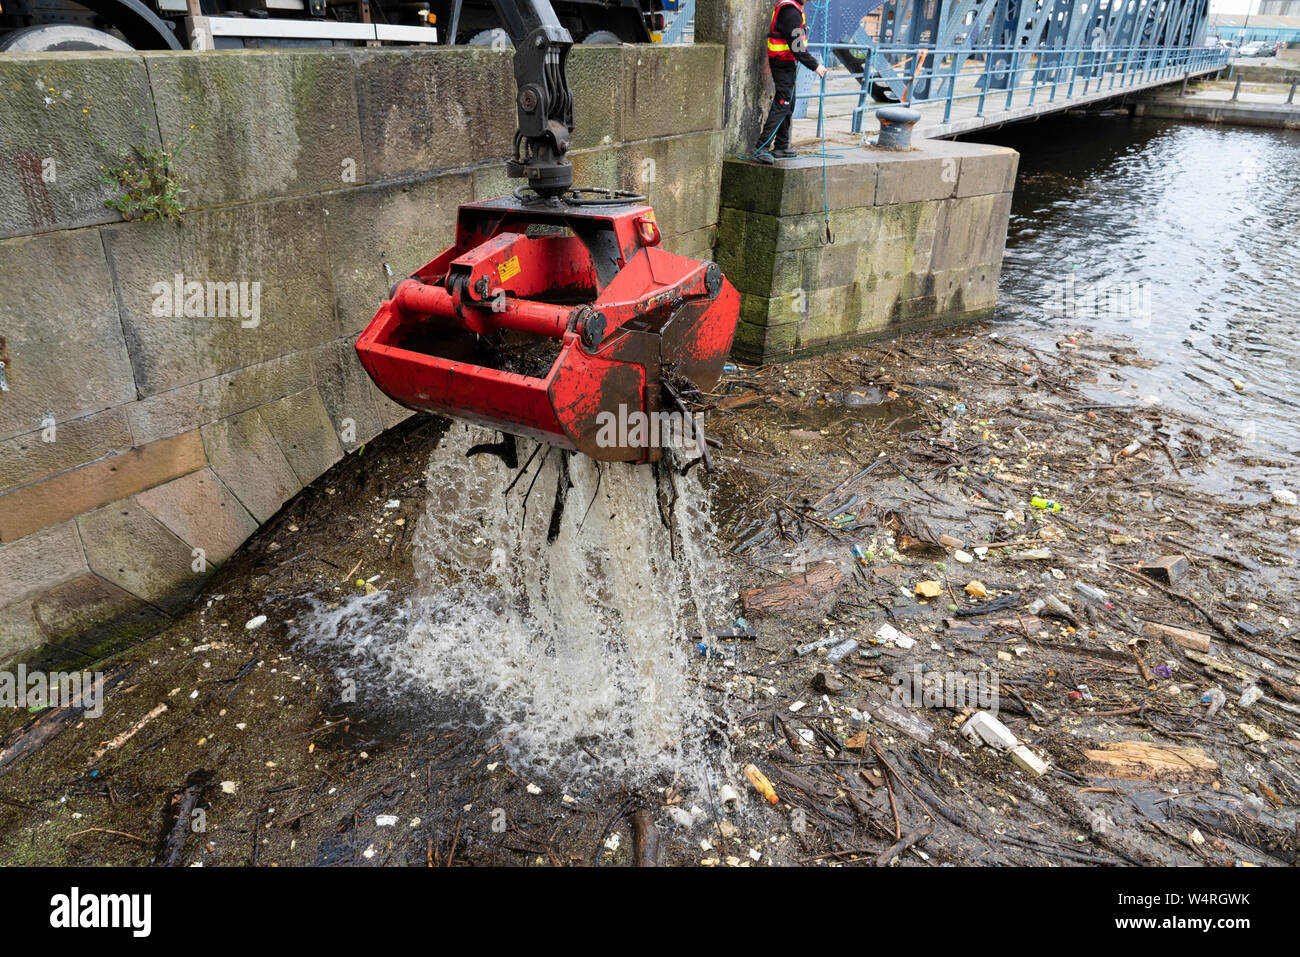 Clean up of debris collected at bridge on Water of Leith river at Leith after heavy rainfall, Scotland, UK Stock Photo